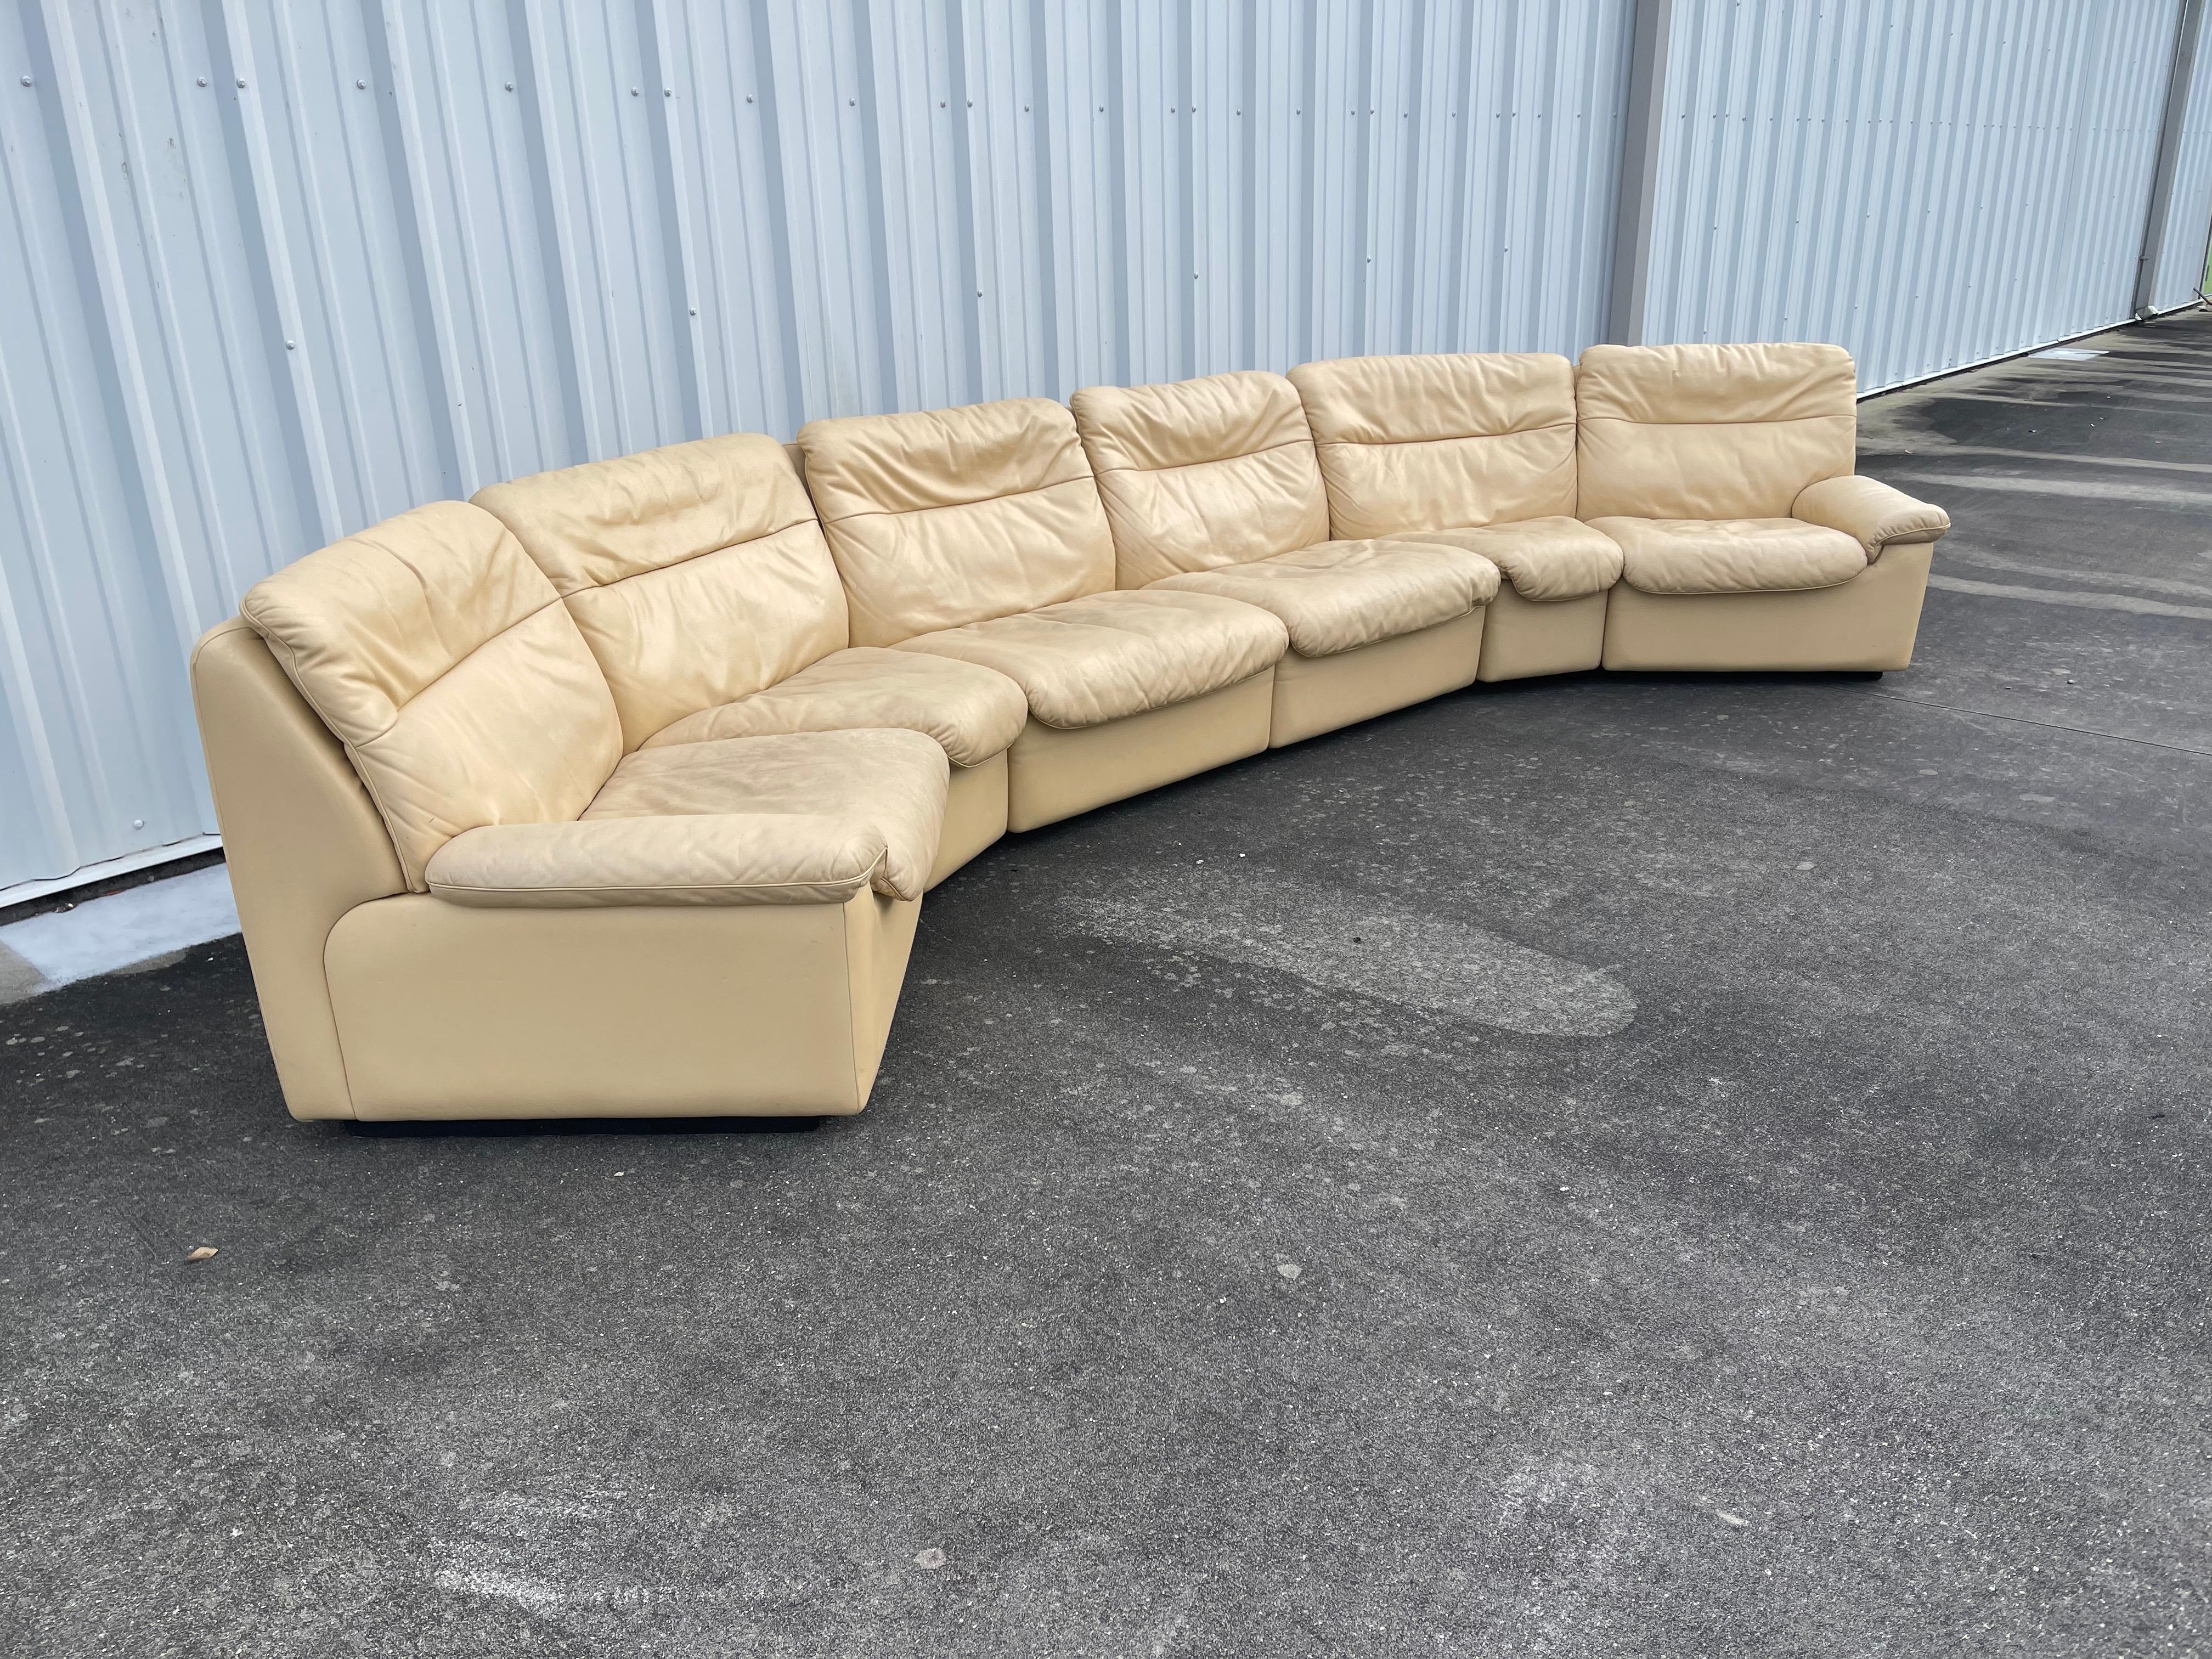 Fabulous vintage De Sede leather sectional sofa. Modular pieces mean myriad options for arrangement. Six (6) pieces in total: 2 end pieces, 2 corner pieces, and 2 armless pieces for the center or as complementary slipper chairs. Matching DS63